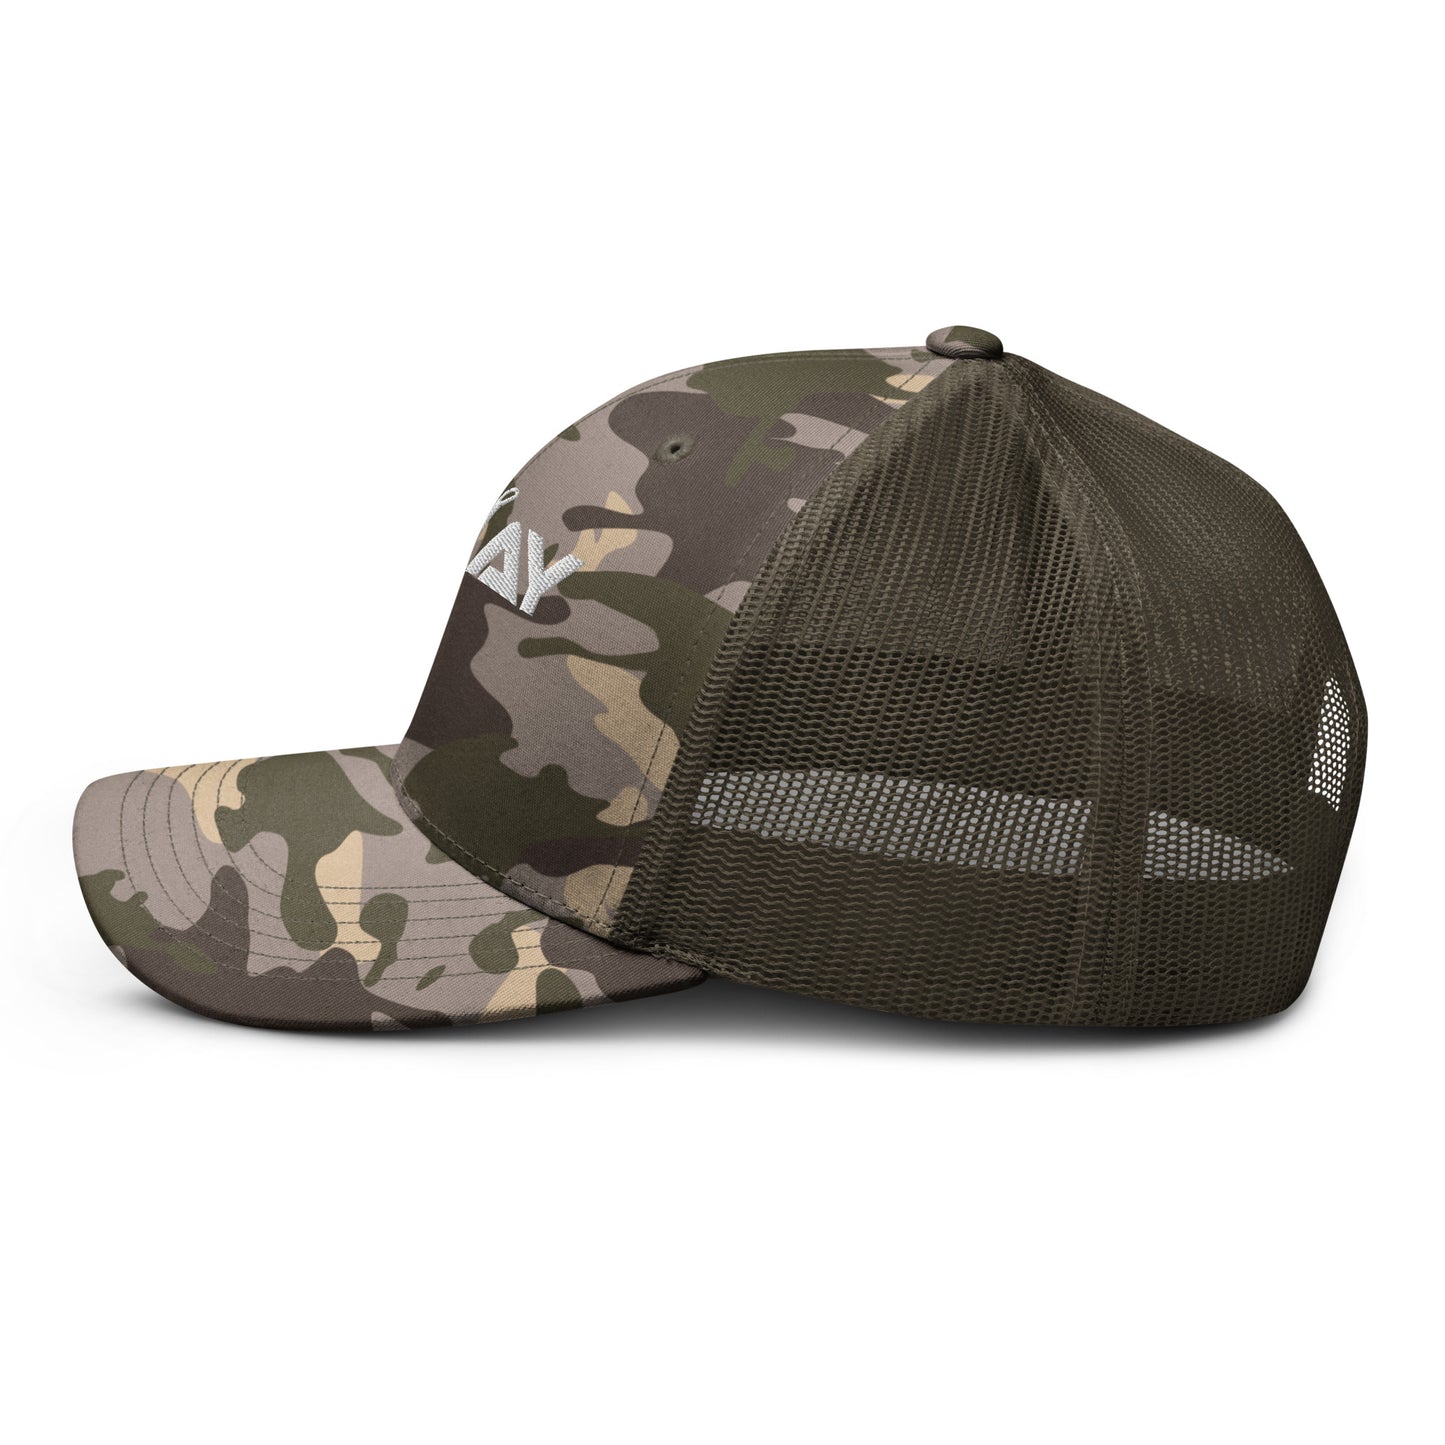 Nujay Outdoors Camouflage Trucker Hat